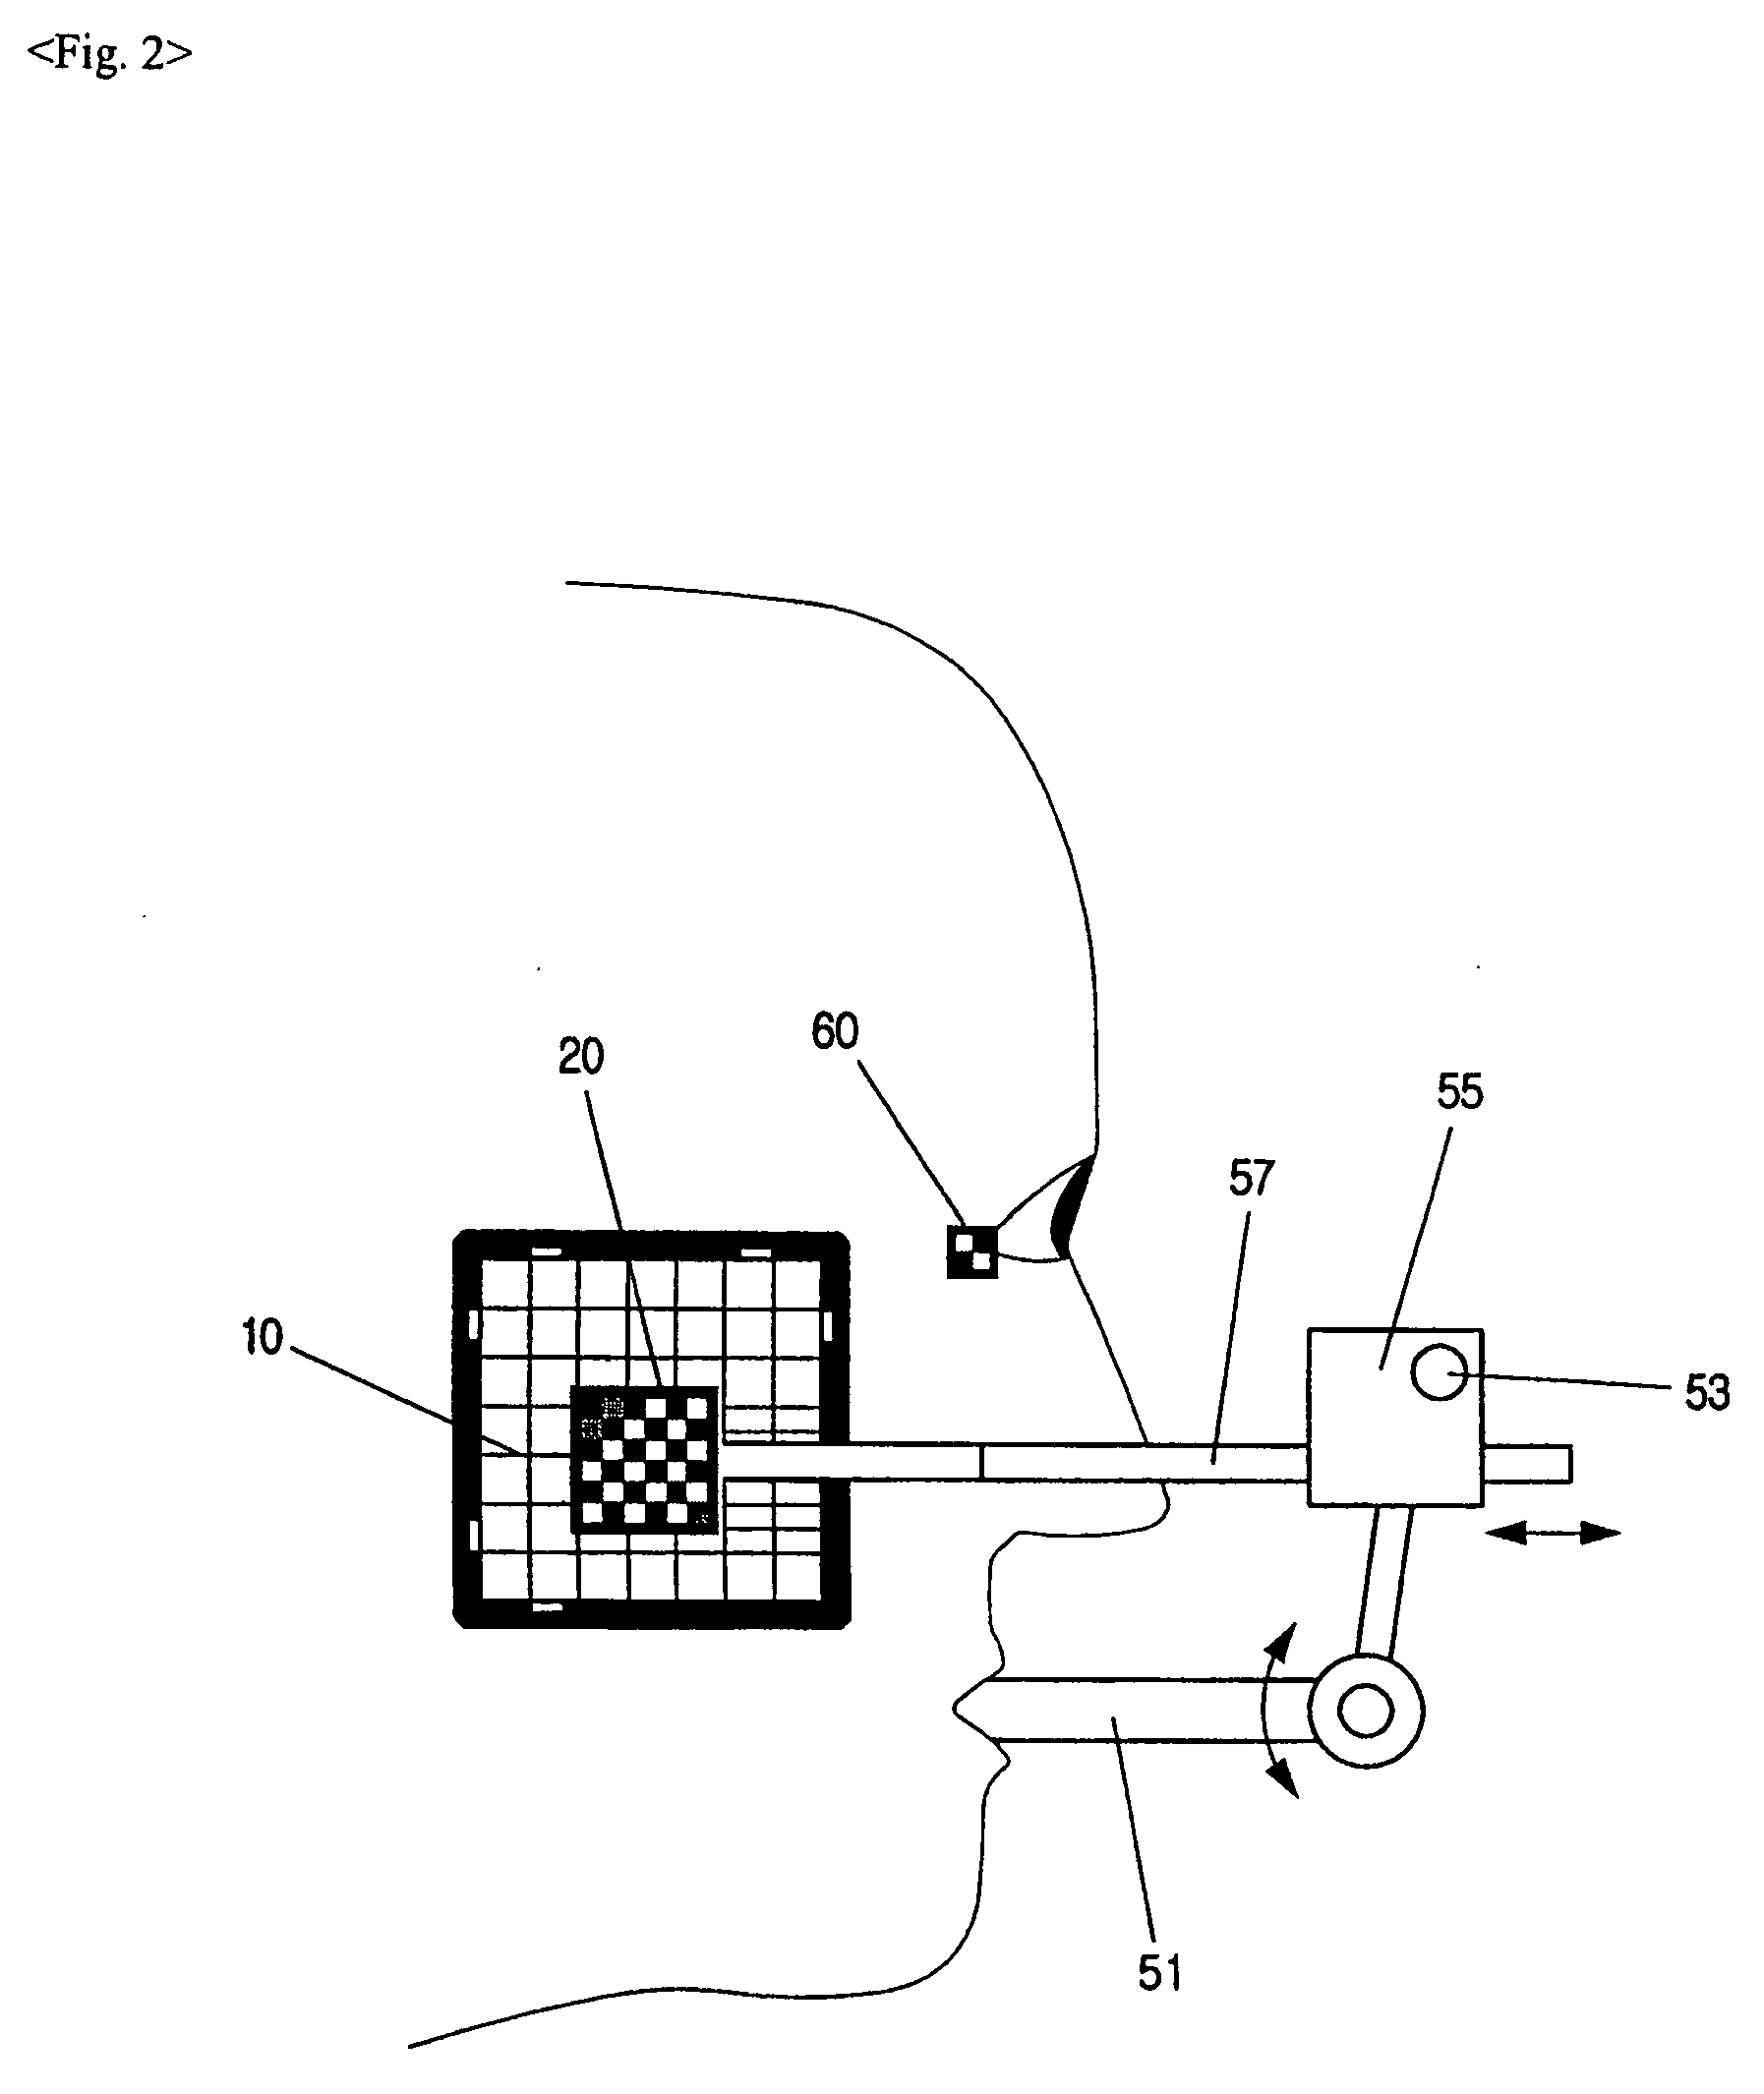 Apparatus and method for measuring jaw motion